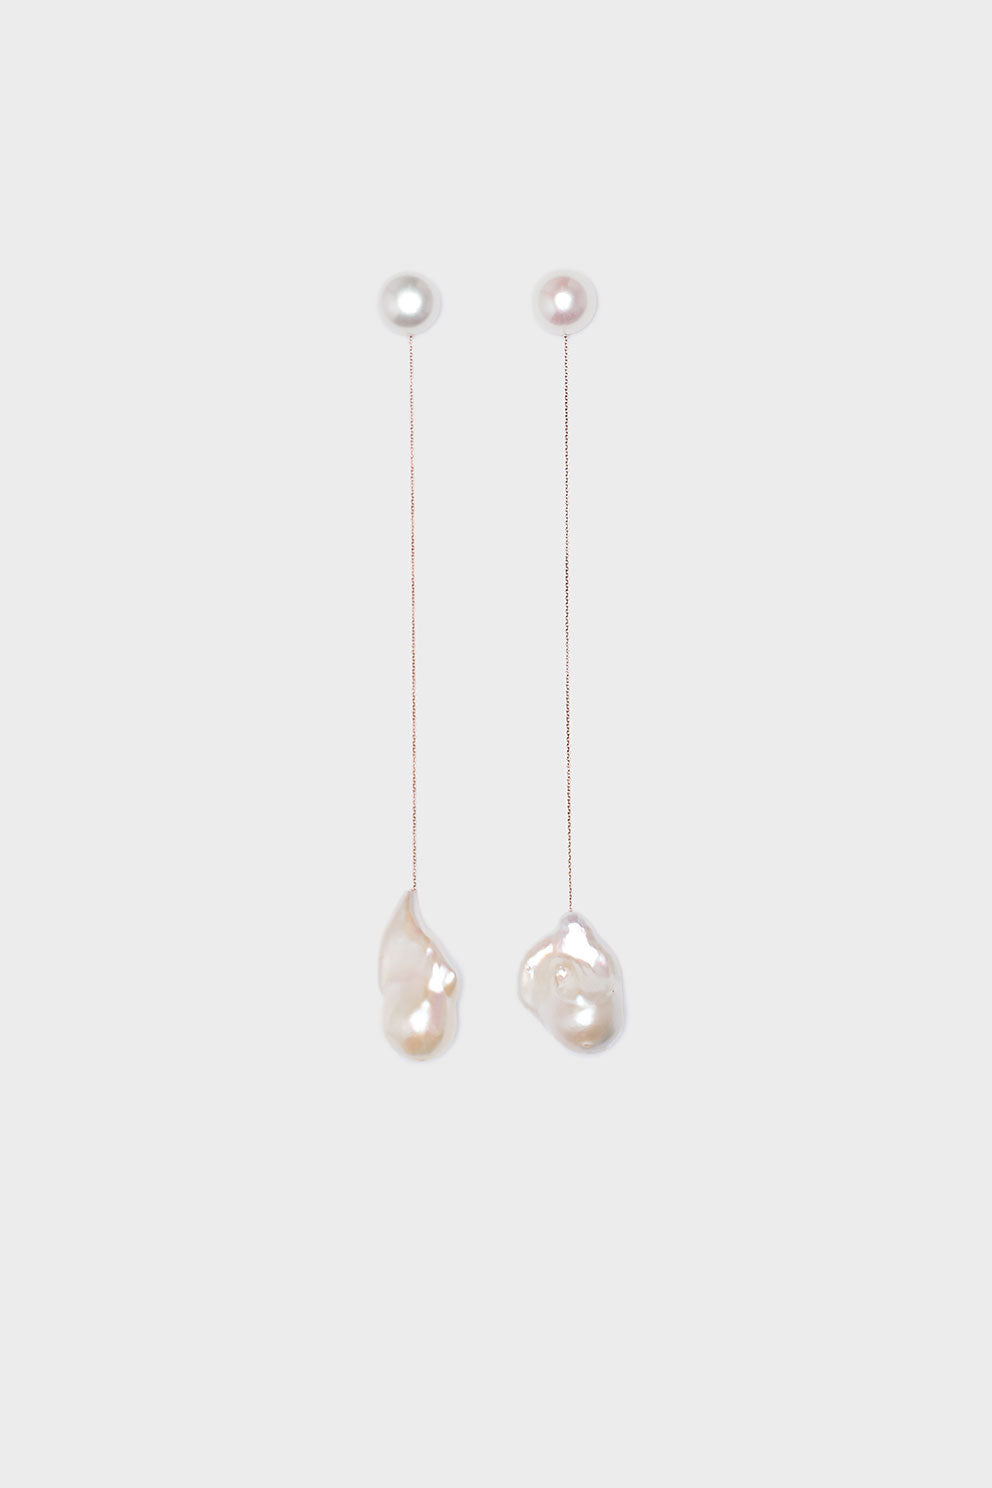 Flaired Baroque Pearl Drop Earrings